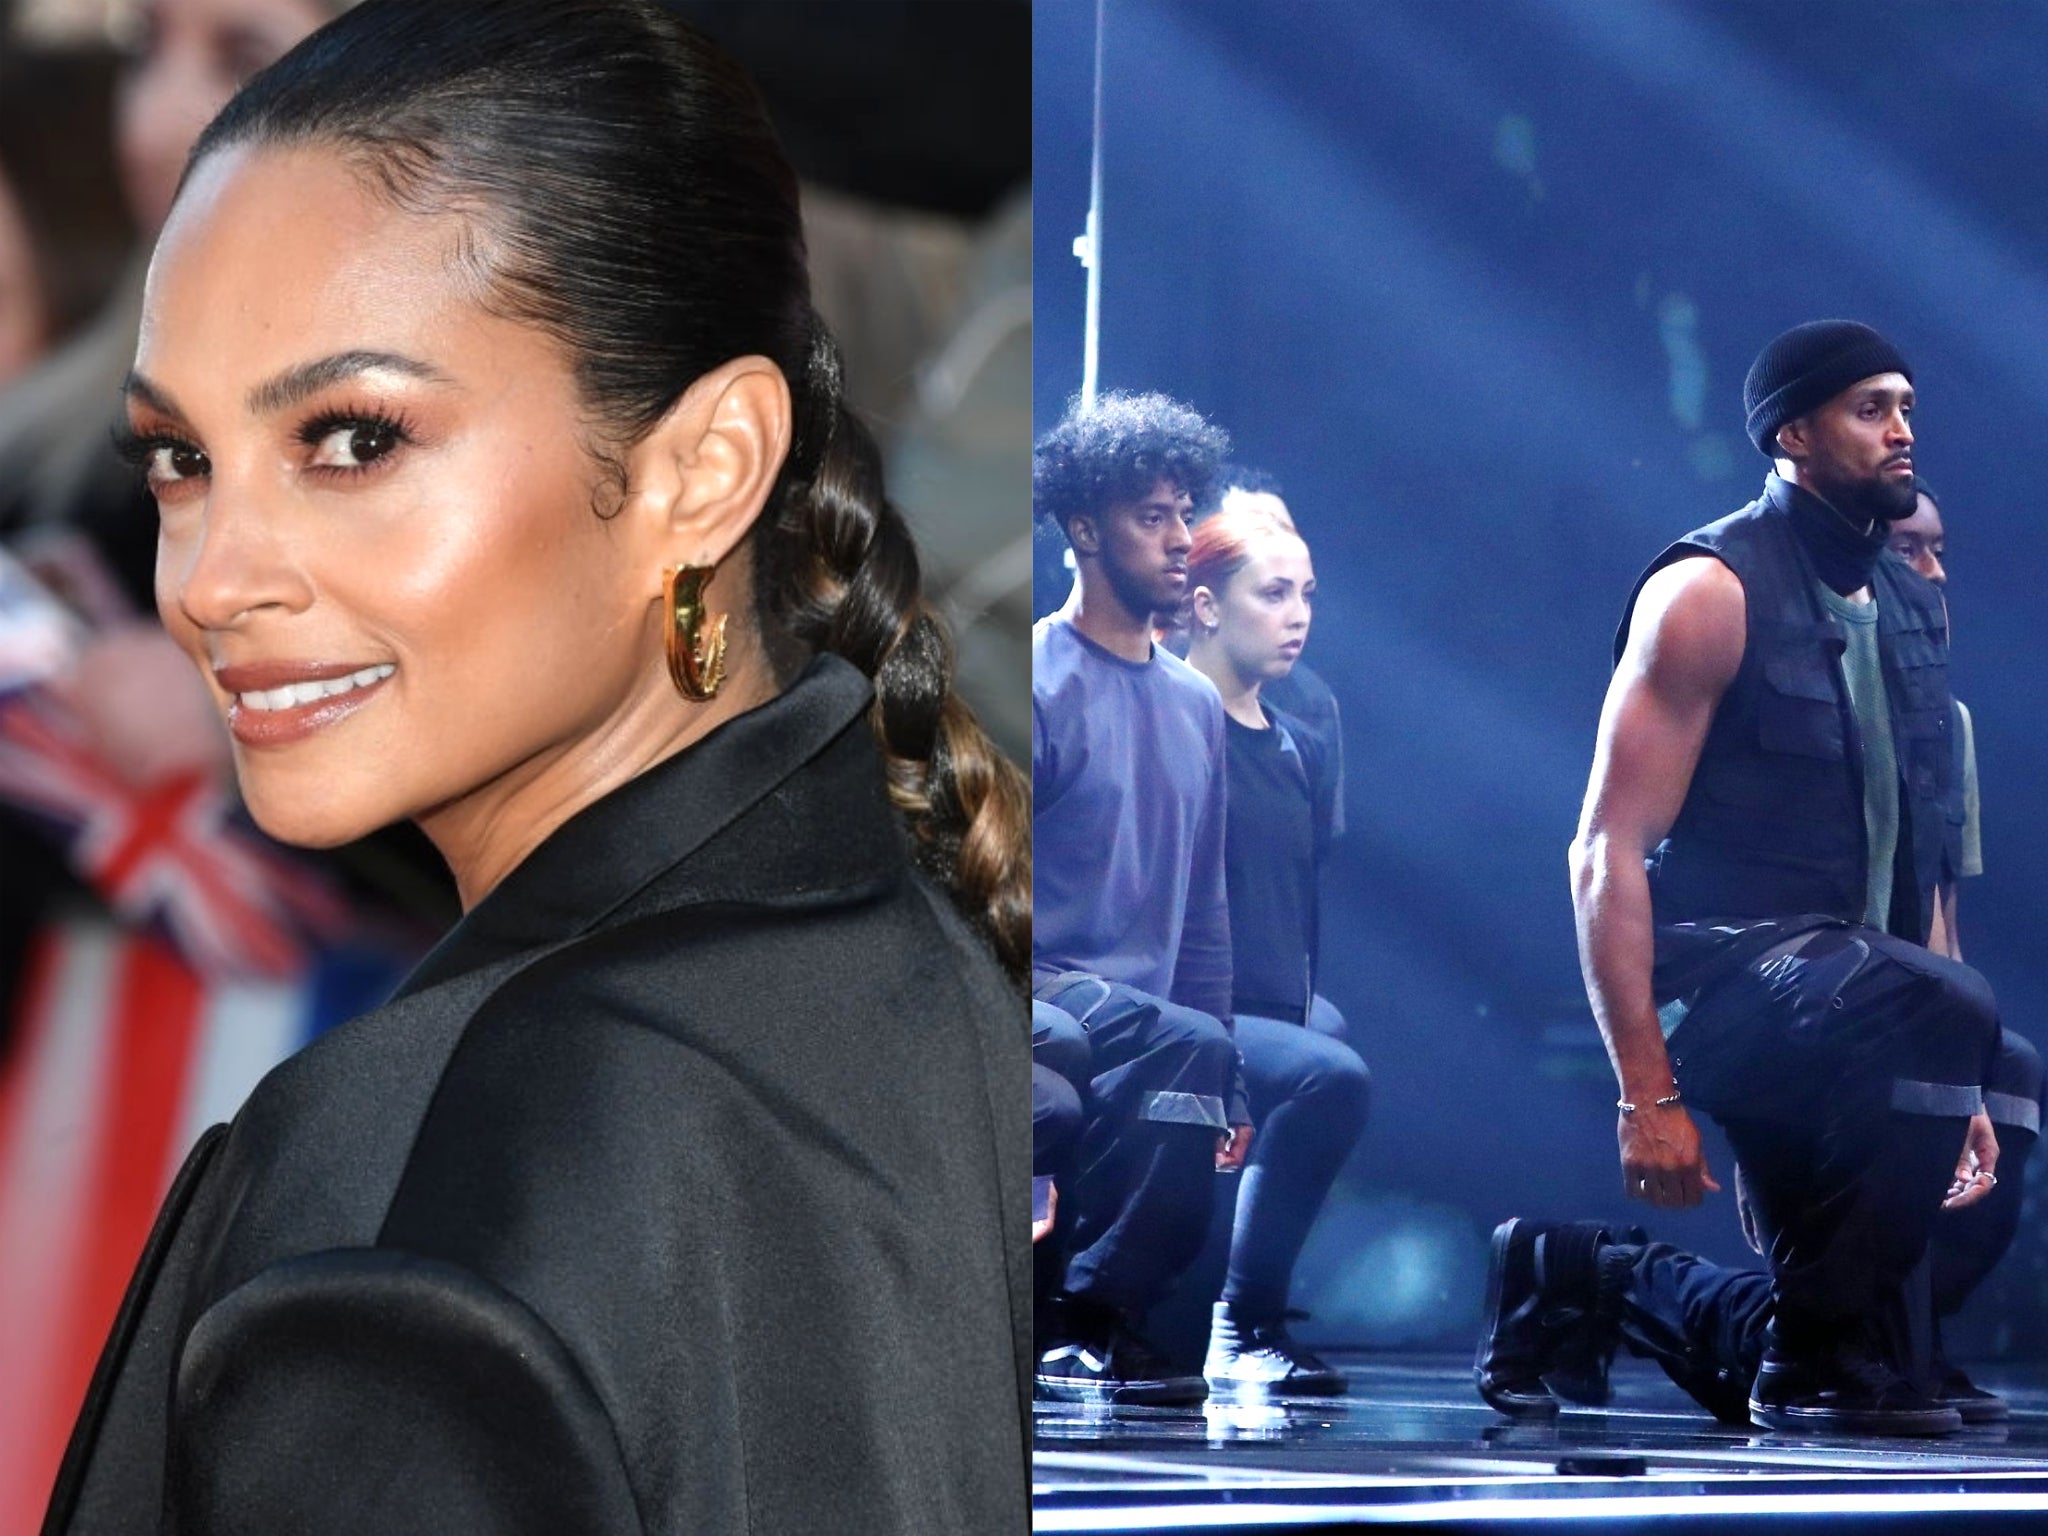 Alesha Dixon and the Black Lives Matter-inspired performance by dance troupe Diversity